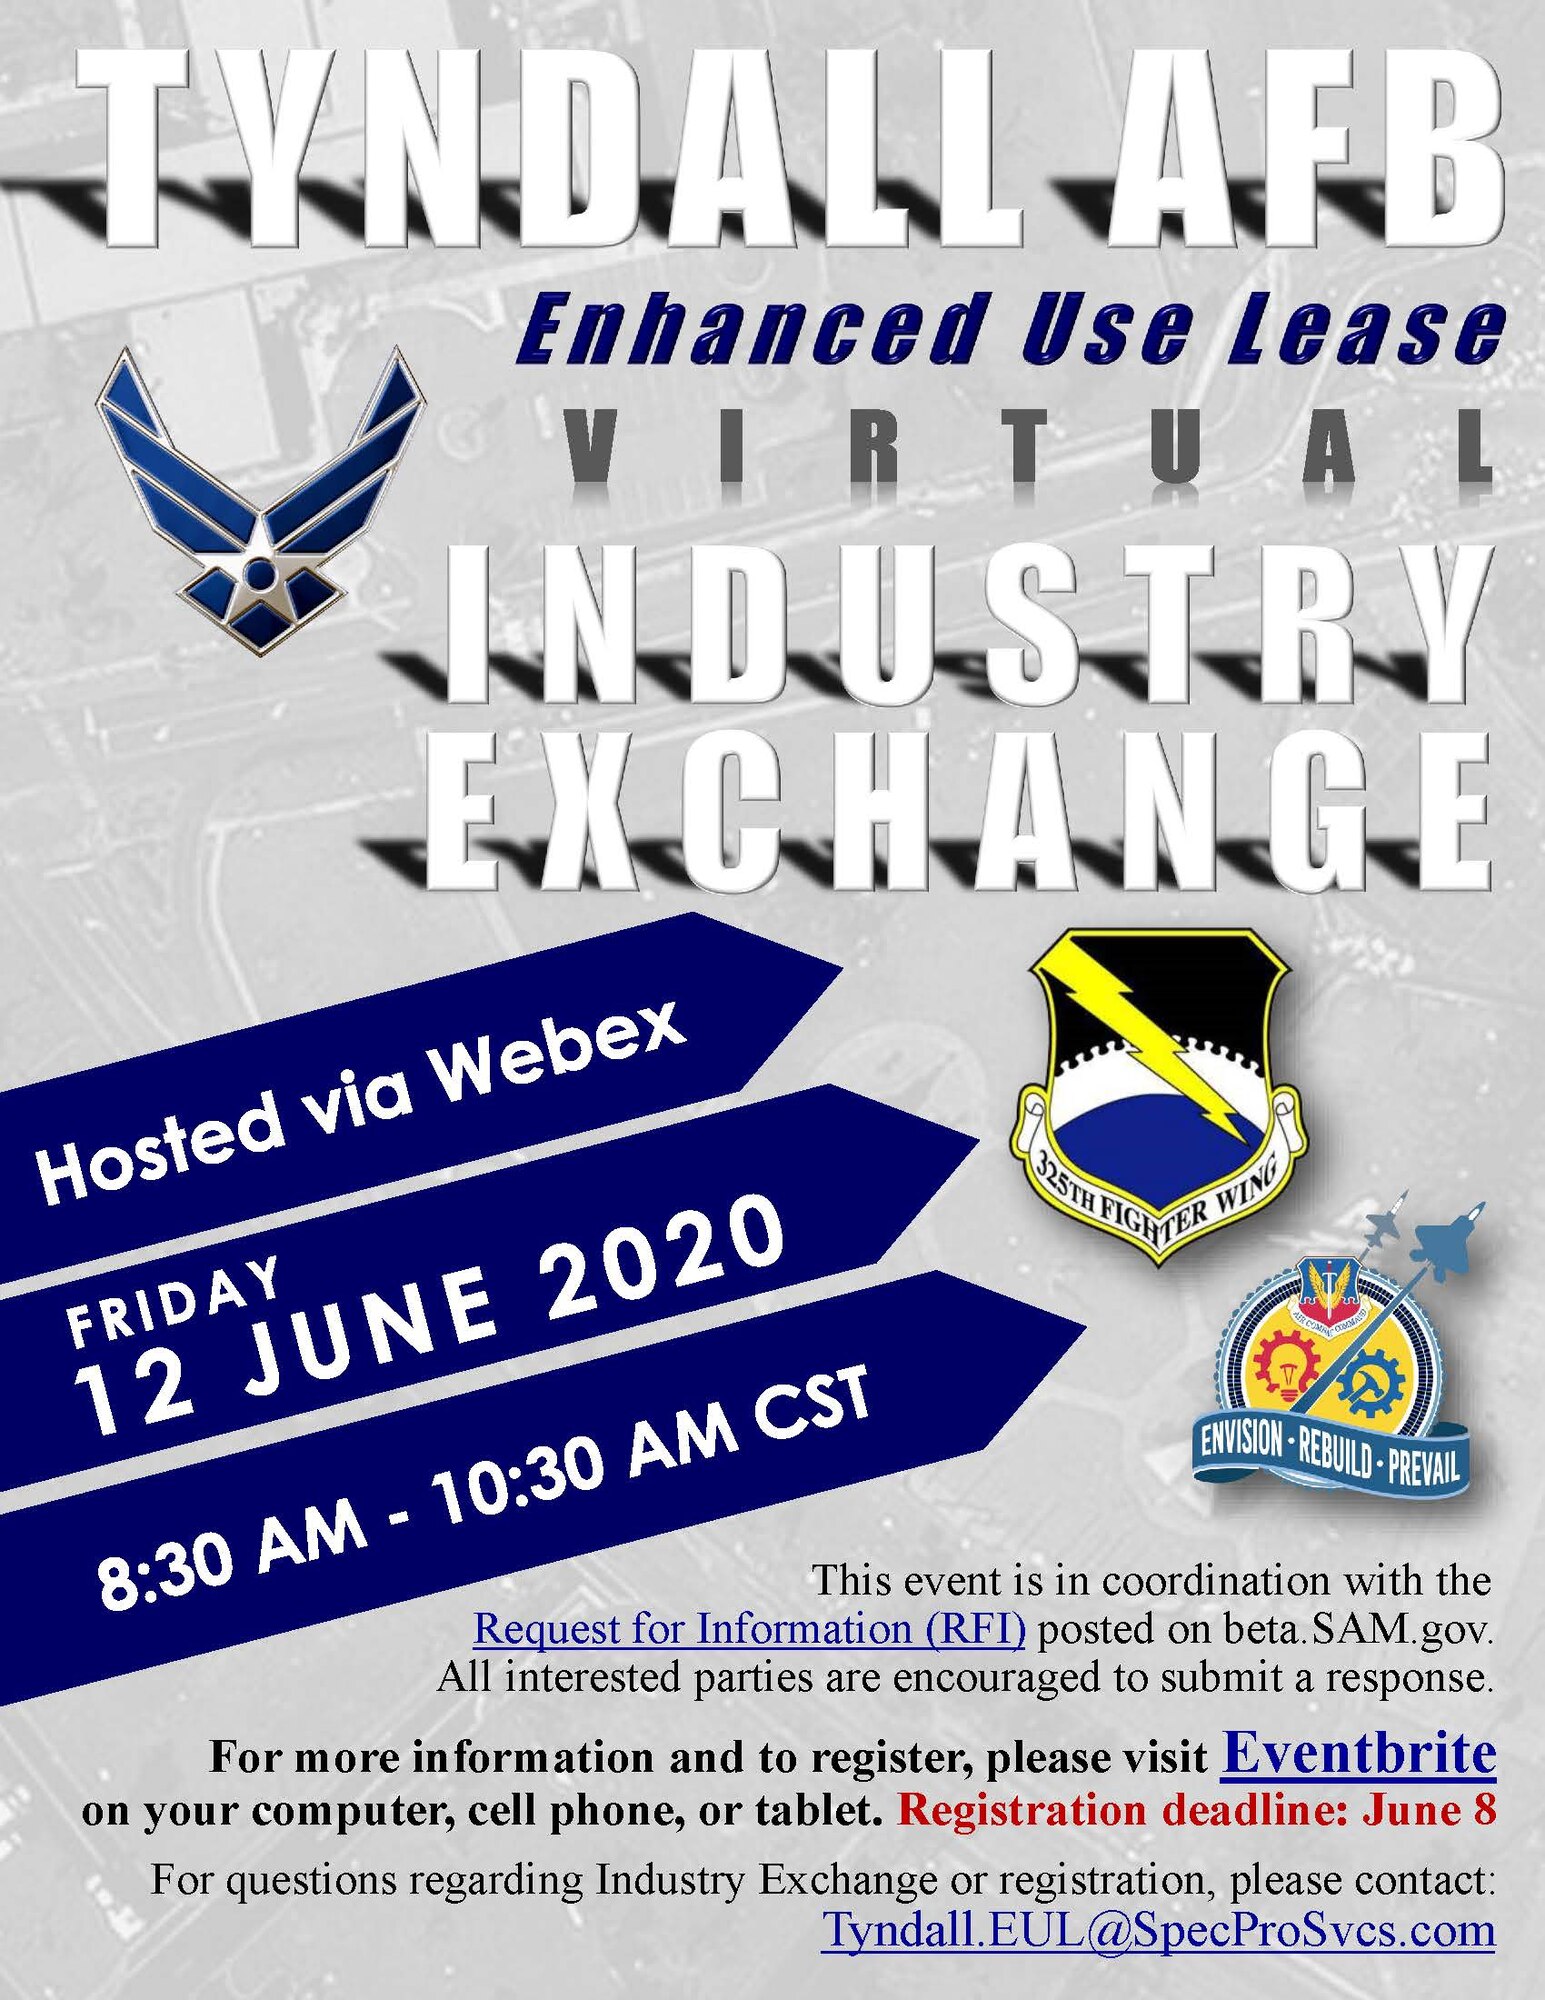 The 325th Fighter Wing and the Air Force Civil Engineer Center will host the first Virtual Industry Exchange on June 12, 2020 to explore possible mixed-use commercial development at Tyndall AFB.